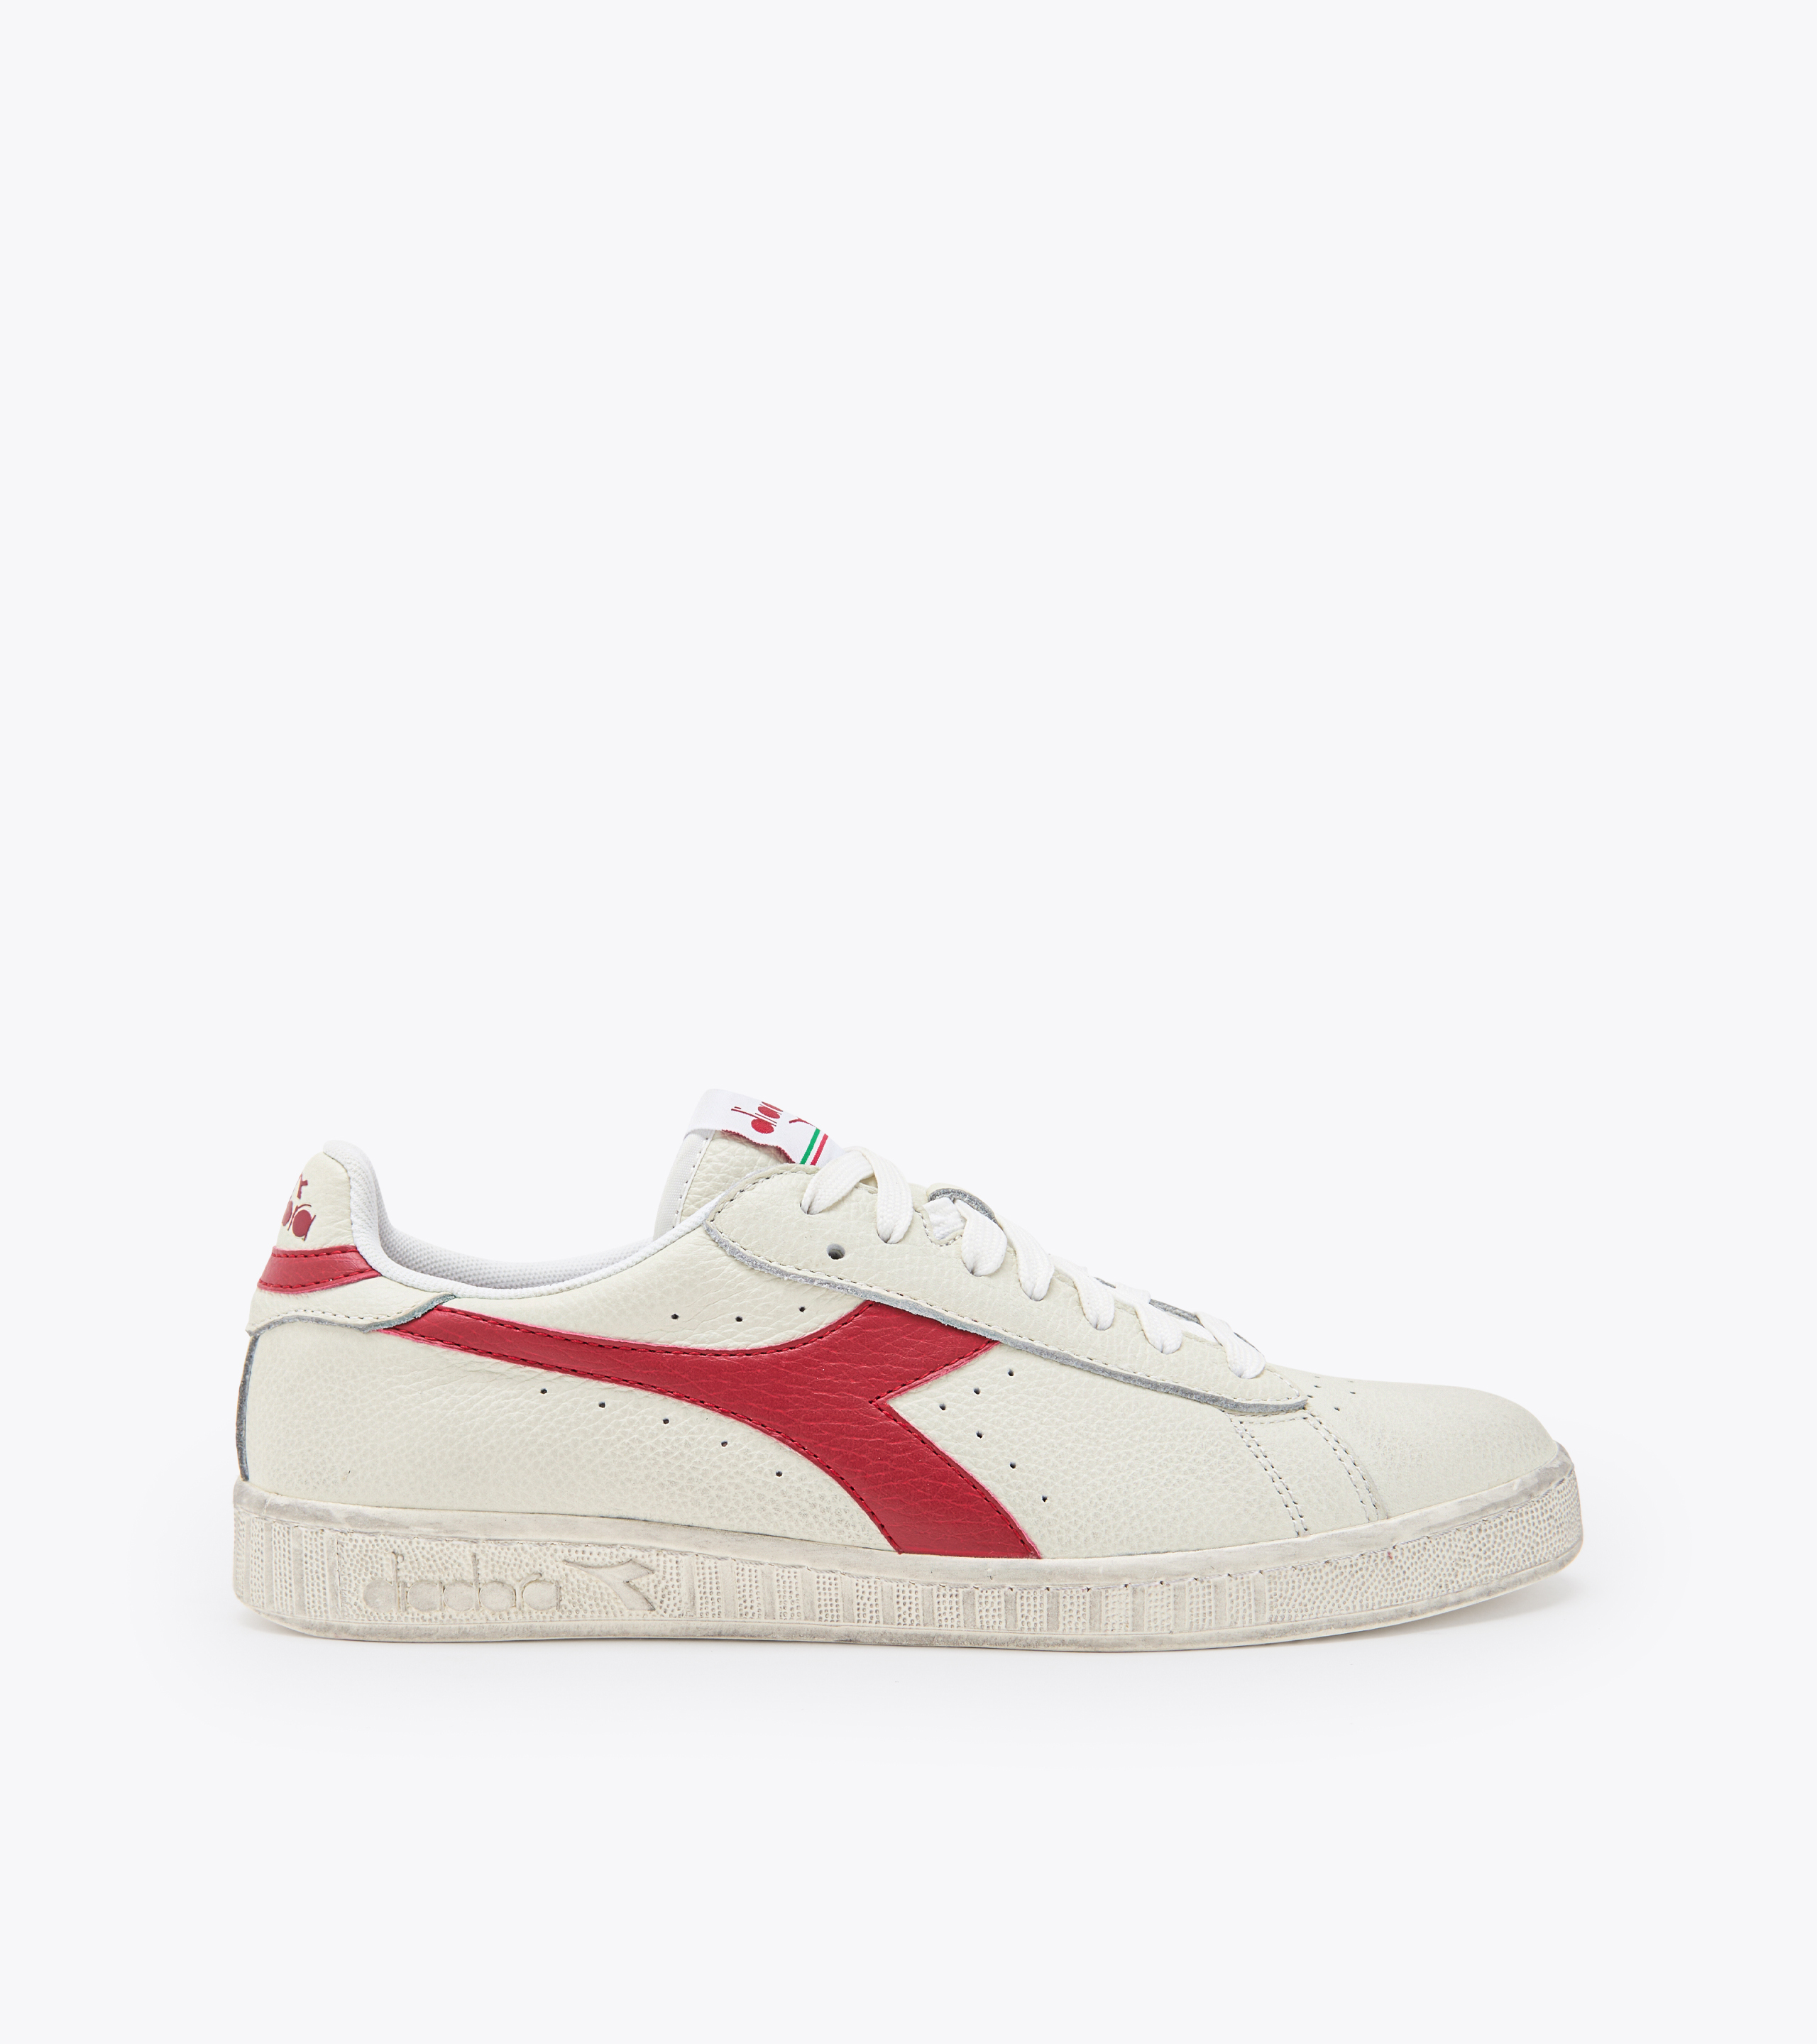 GAME L LOW WAXED Sporty sneakers - Unisex - Diadora Online Store GB